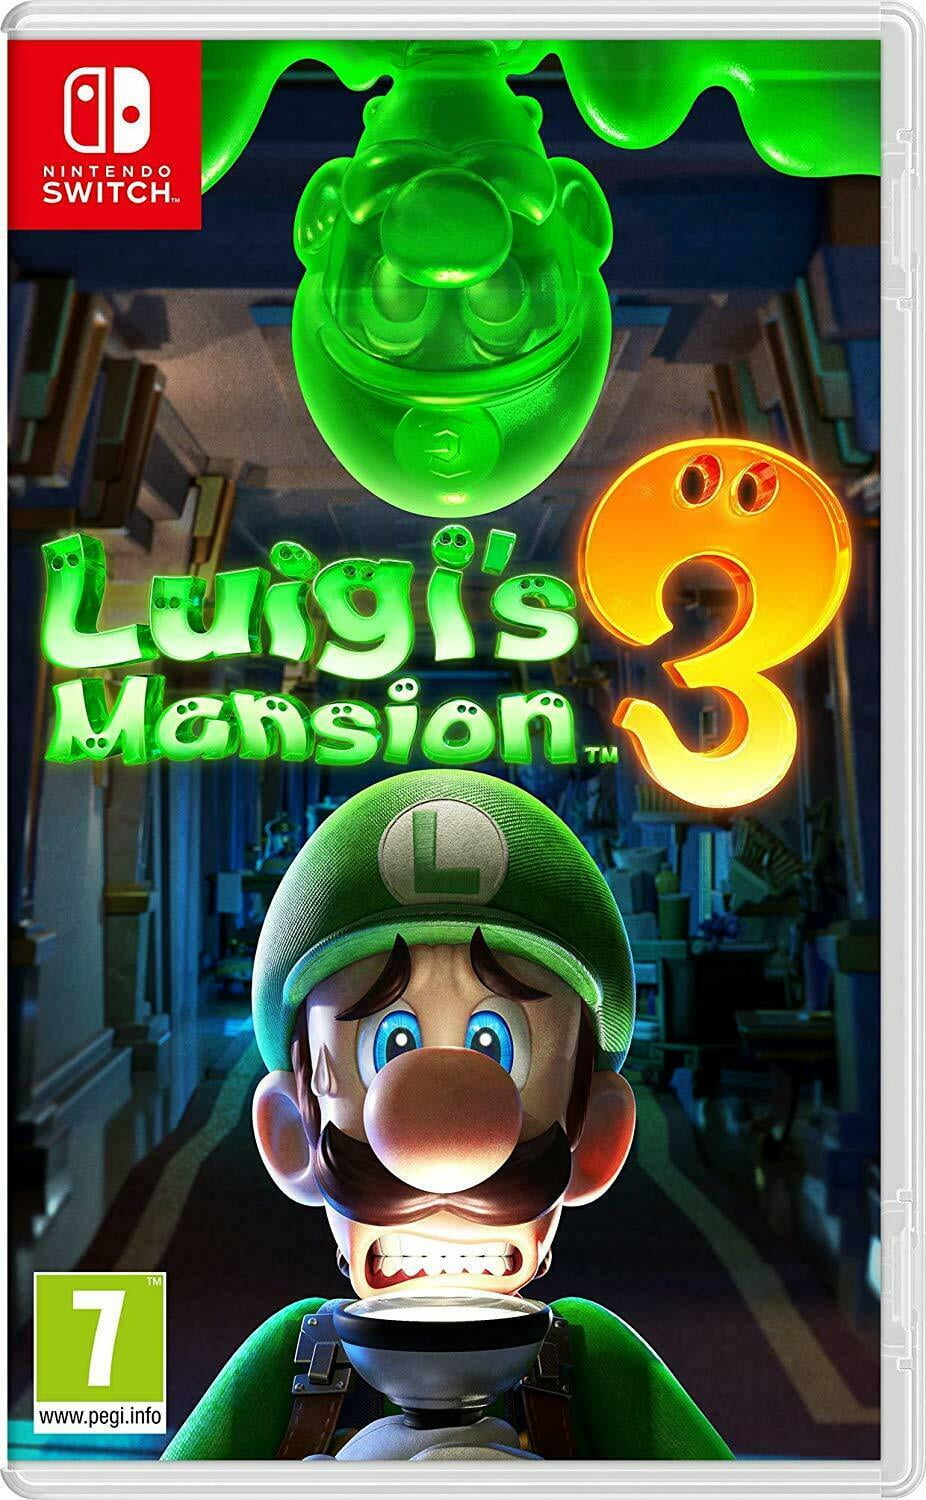 Luigi's Mansion for the 3DS on the big screen! Using Retroarch on the  Switch! : r/SwitchPirates